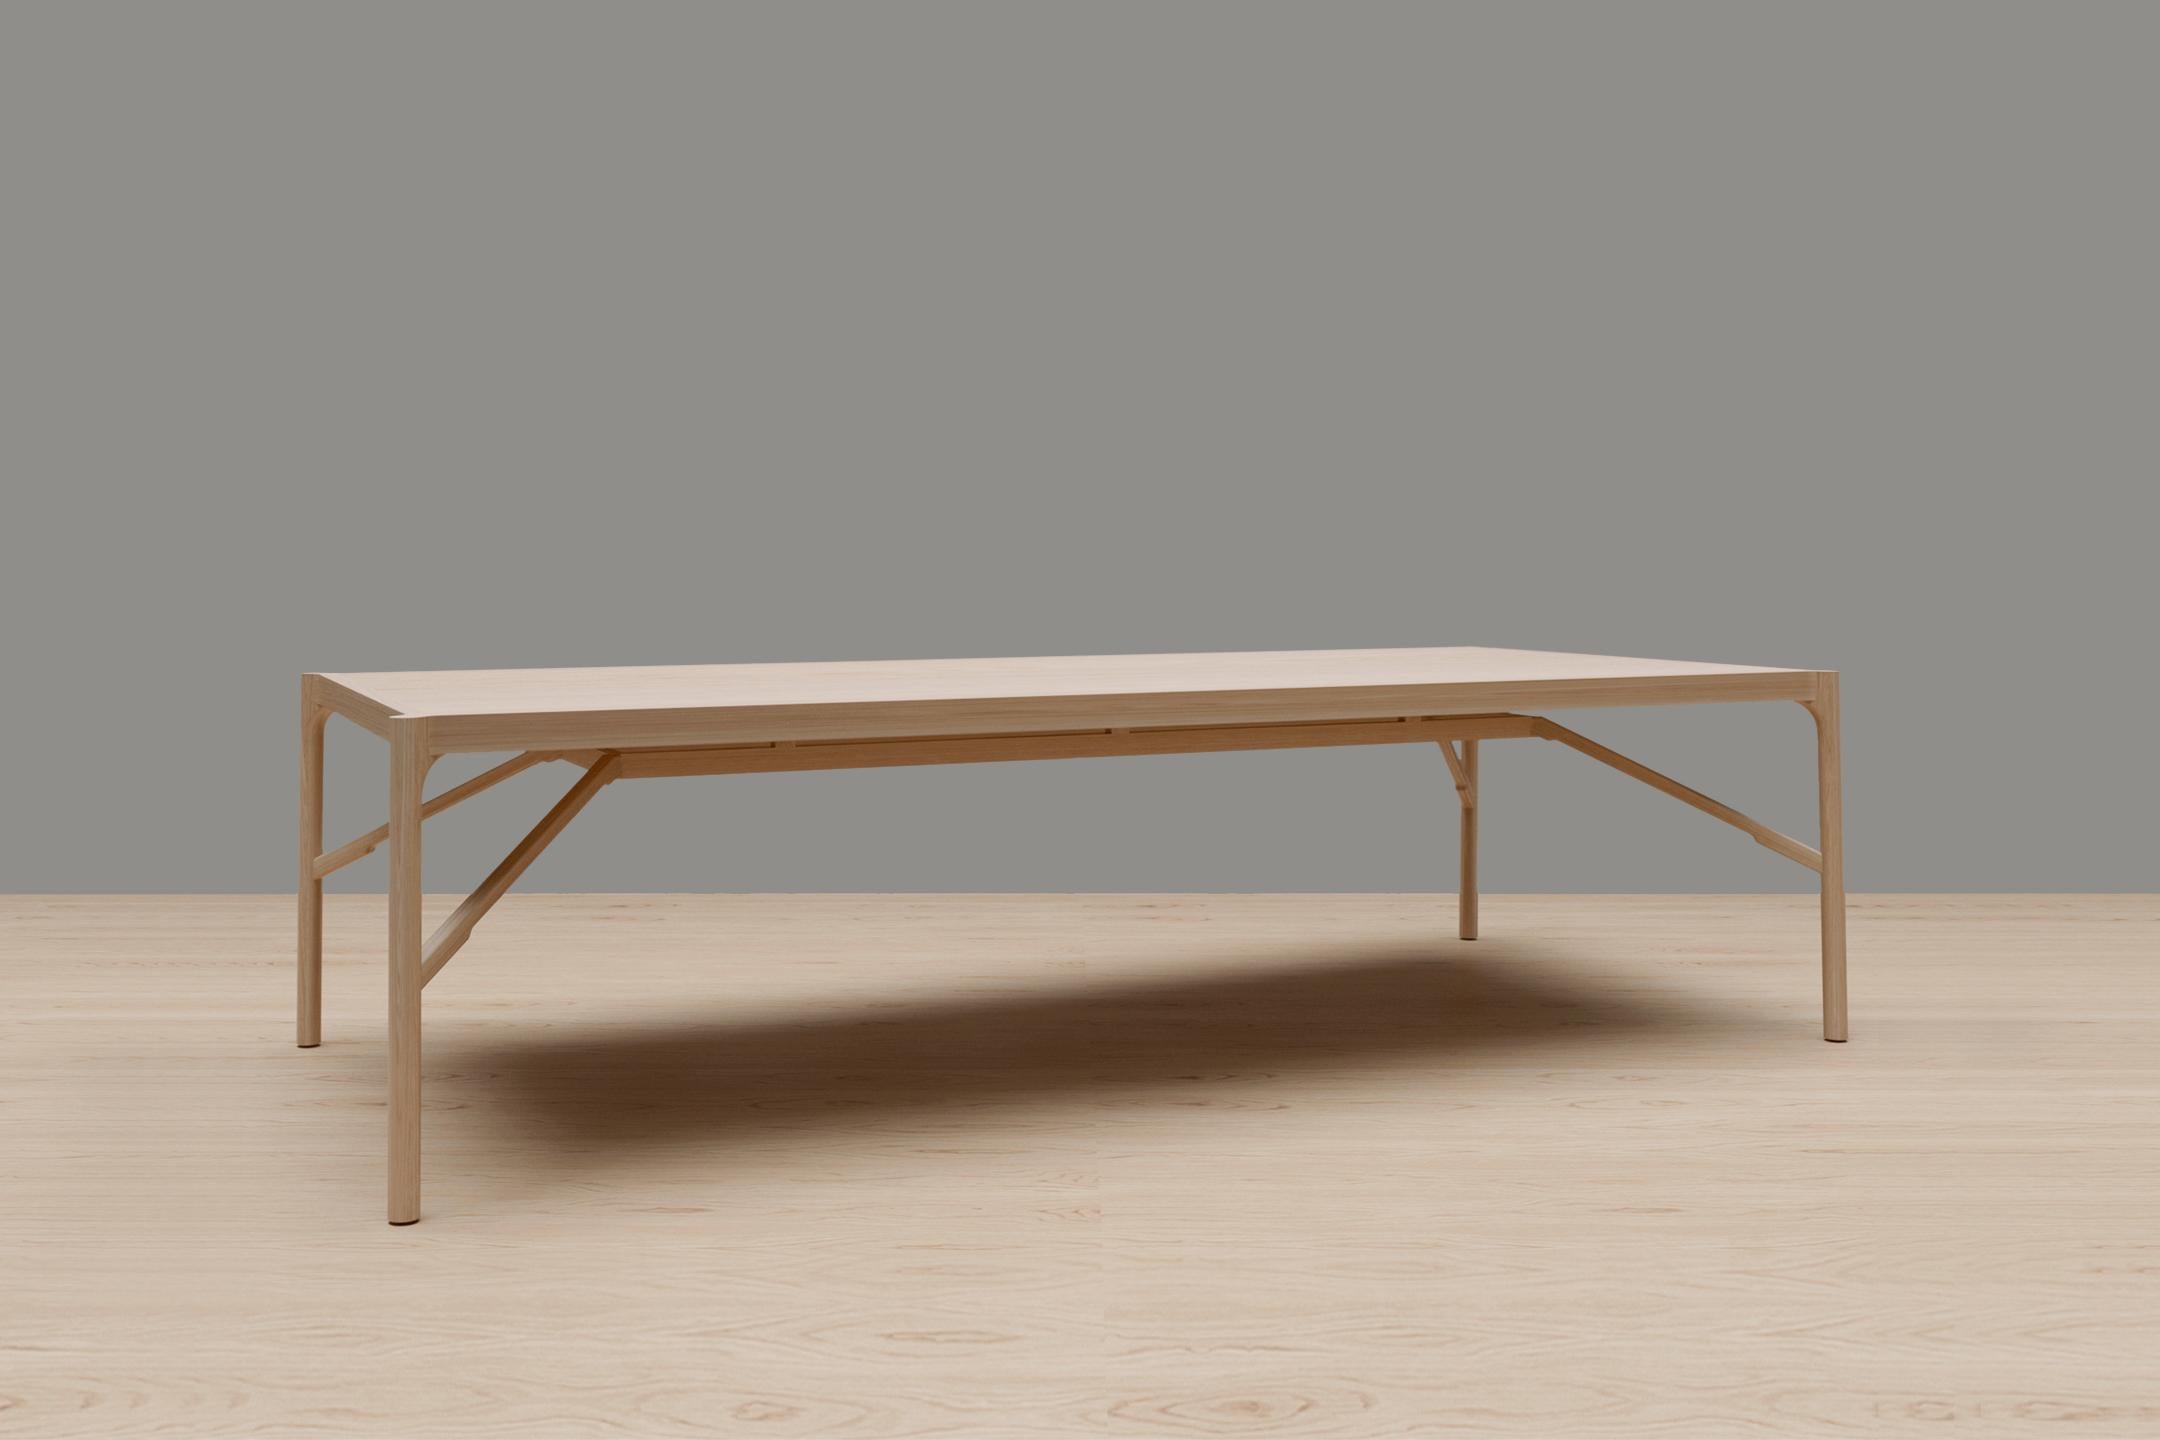 Linard dining table by Thai Hua
Dimensions: D 245 x W 120 x H 75 cm
Materials: oak wood.

Rectangular dining table made of natural white oak.

Thai Hua is an industrial designer originally from Vietnam trained in Switzerland. Since 2003 Thai